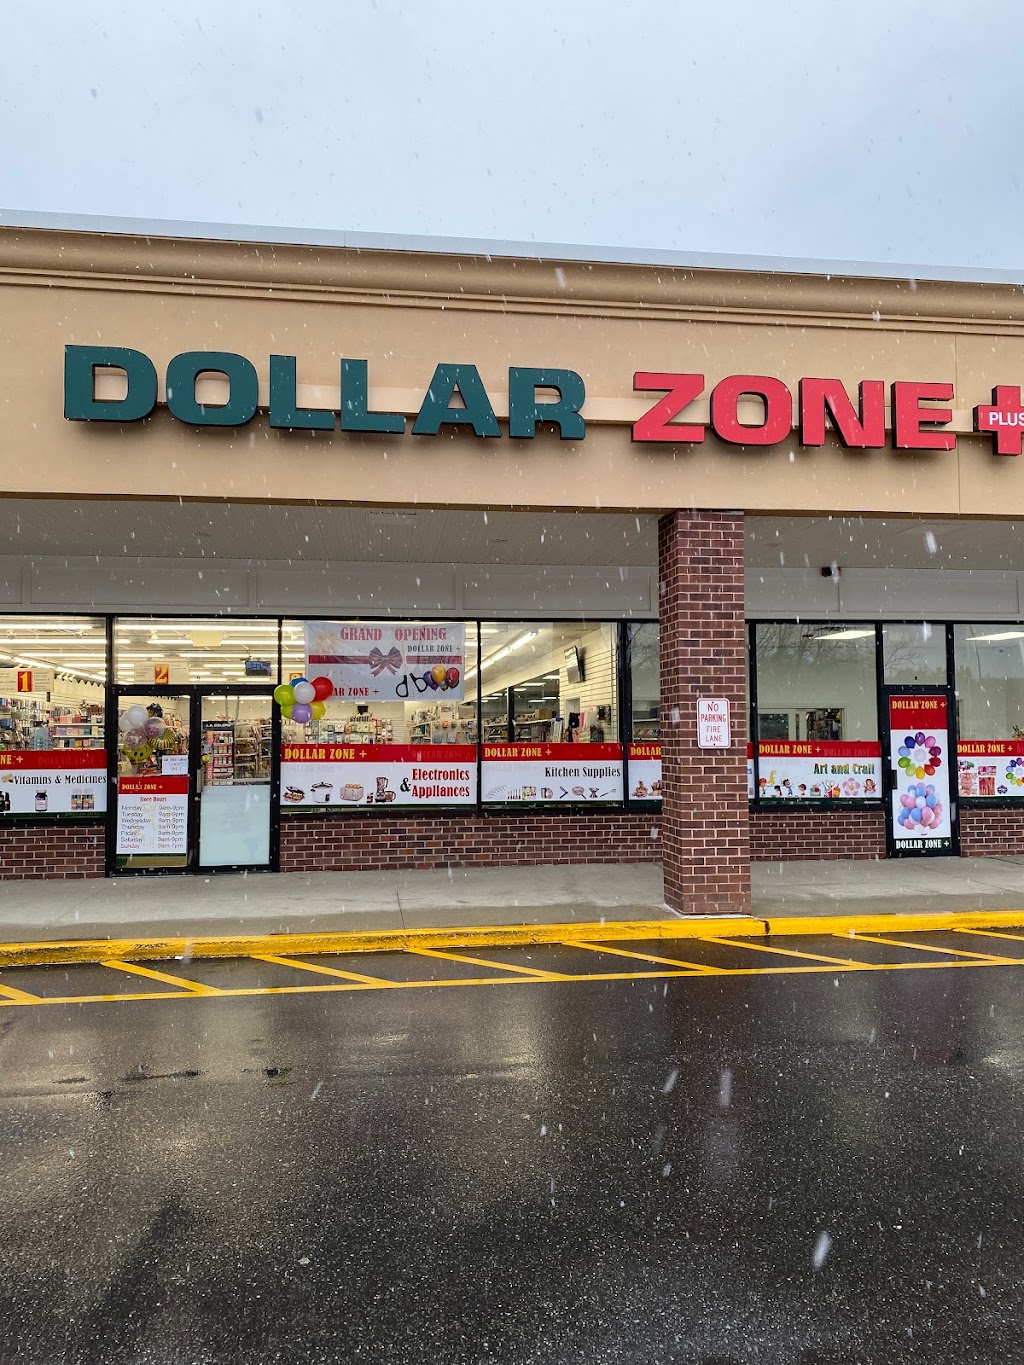 Dollar Zone plus | 656 New Haven Ave, Derby, CT 06418 | Phone: (203) 308-2248